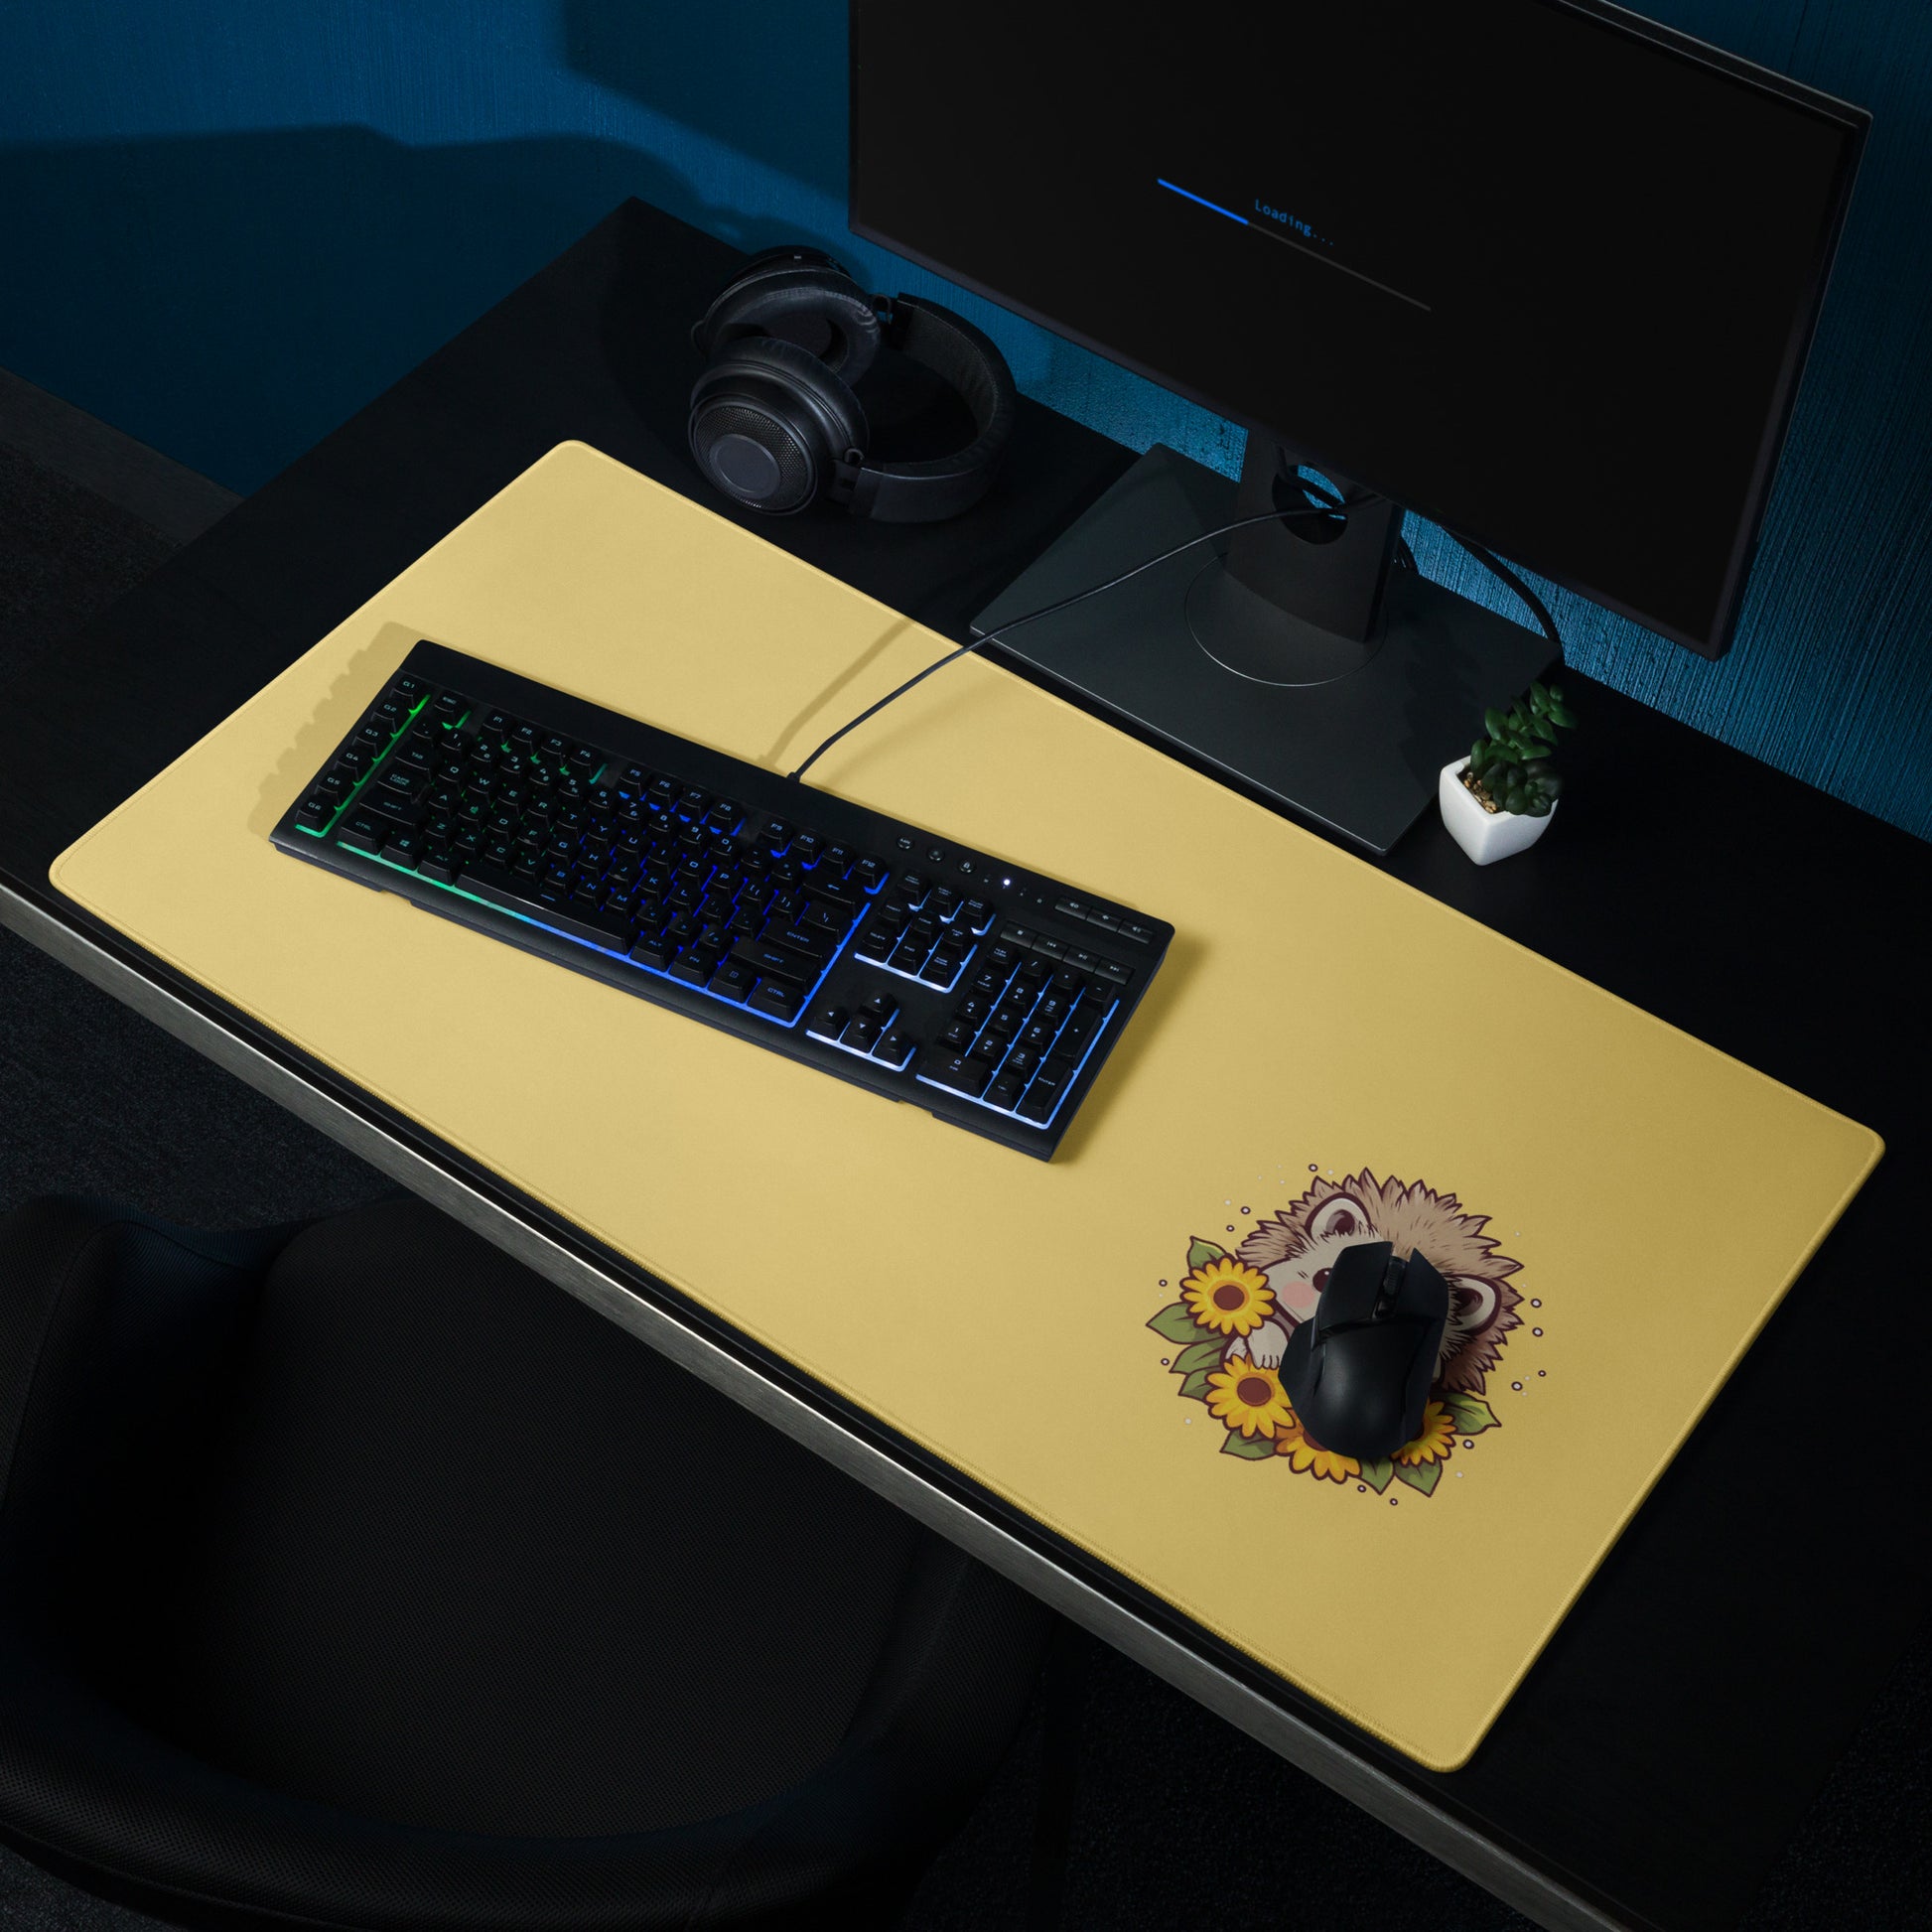 A 36" x 18" desk pad with a cute hedgehog surrounded by sunflowers on it shown on a desk setup. Yellow in color.